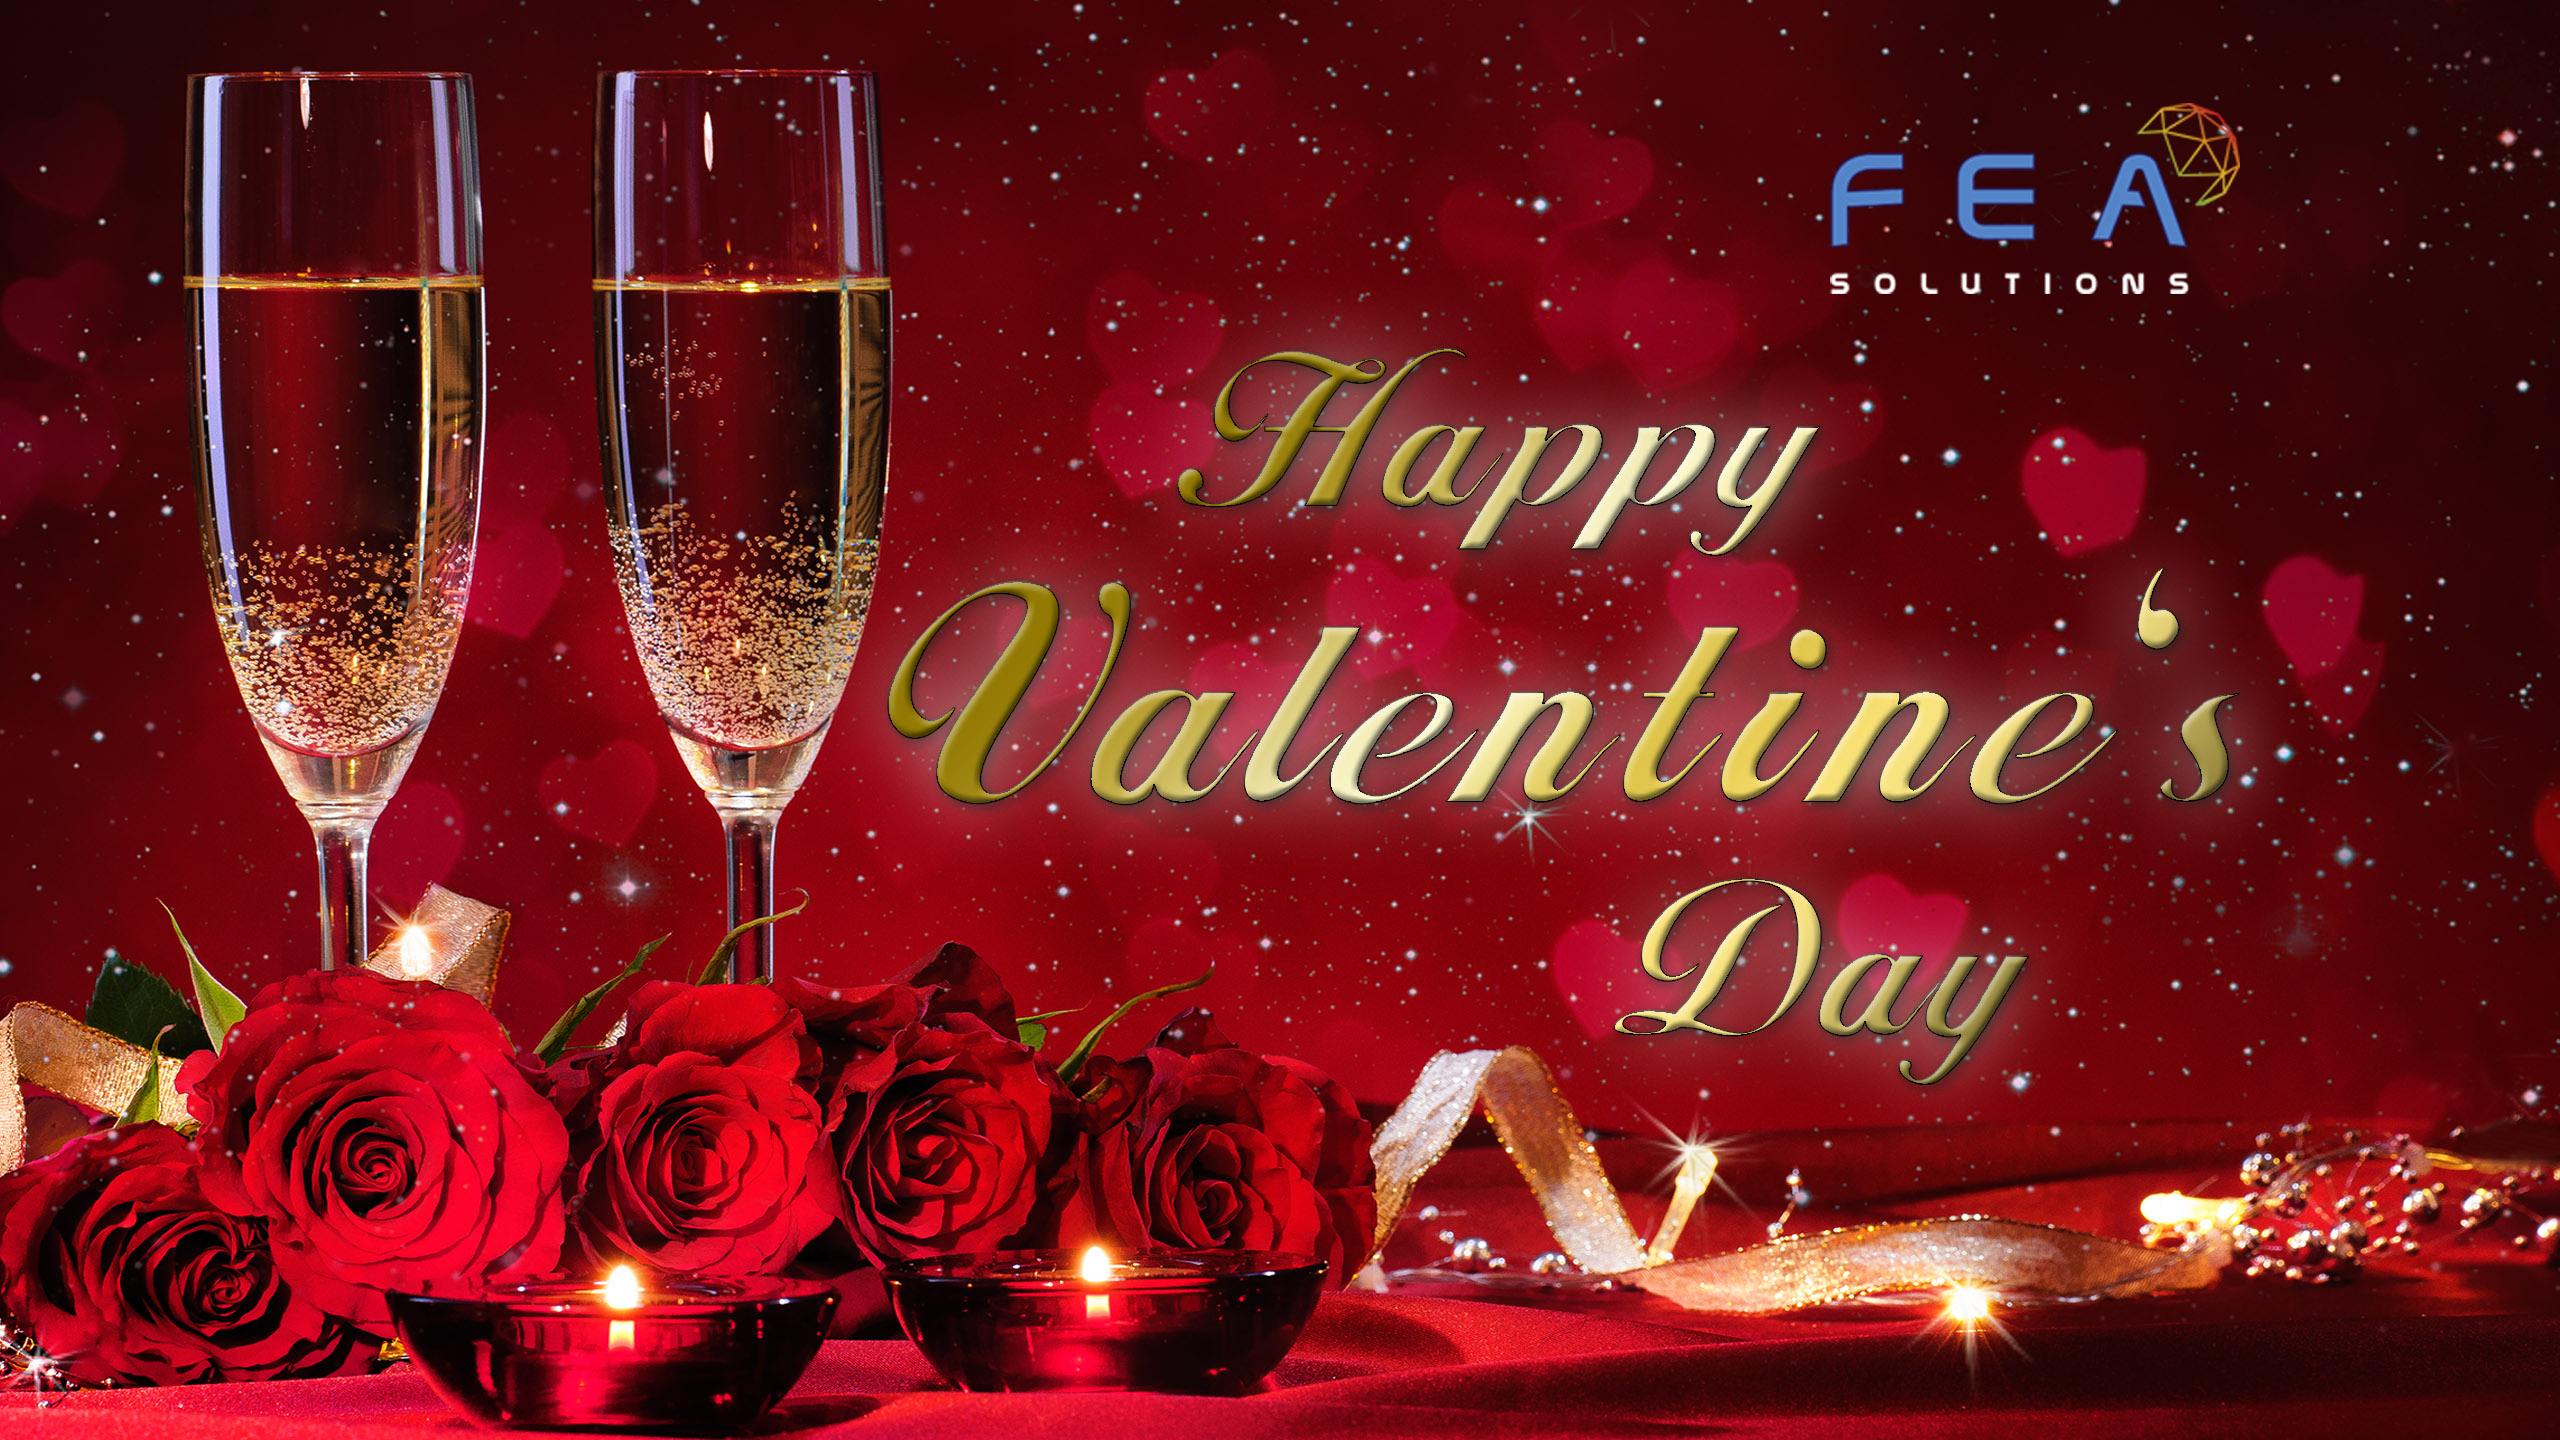 happy valentines message from fea solutions